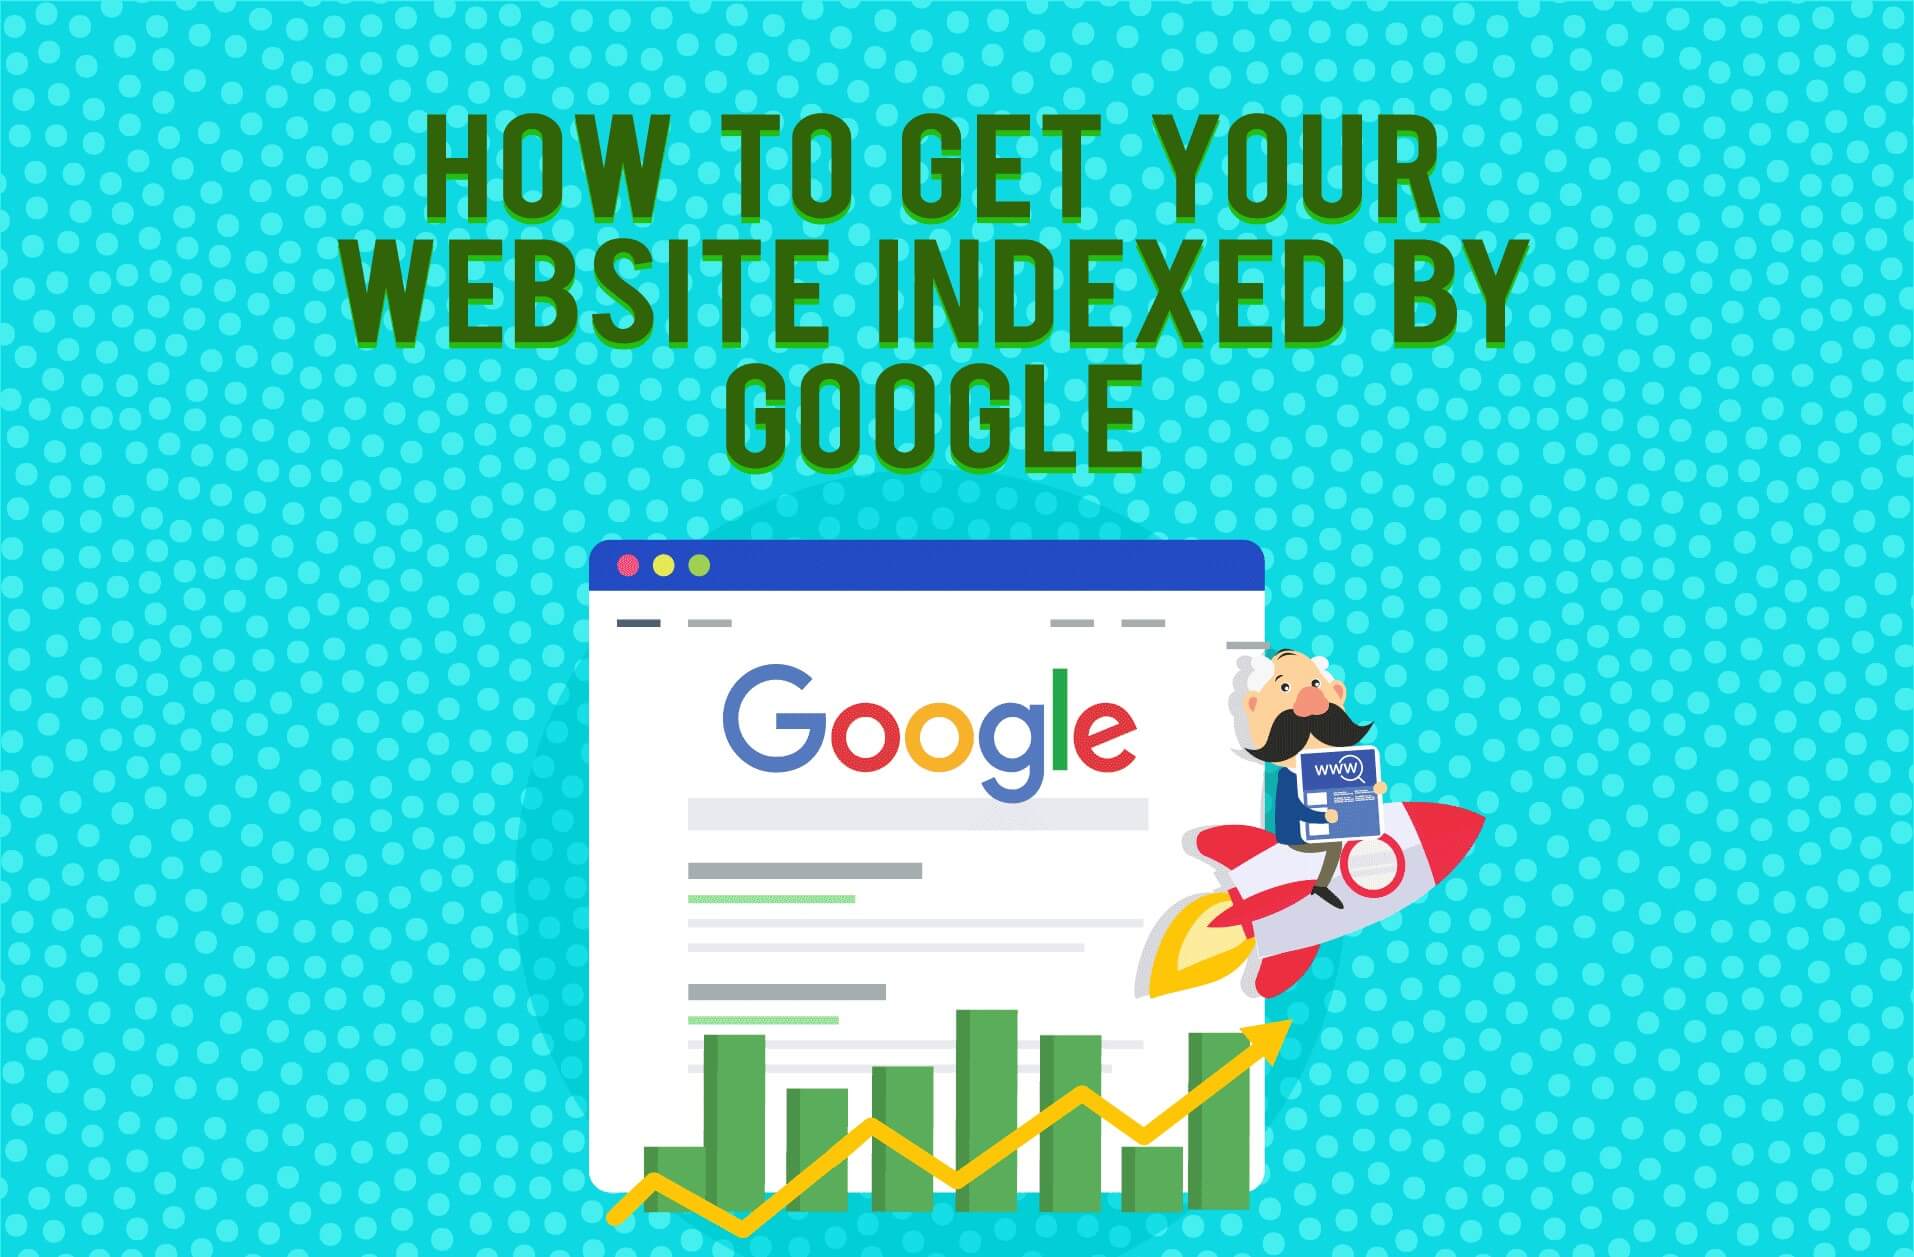 How to get your website indexed by Google